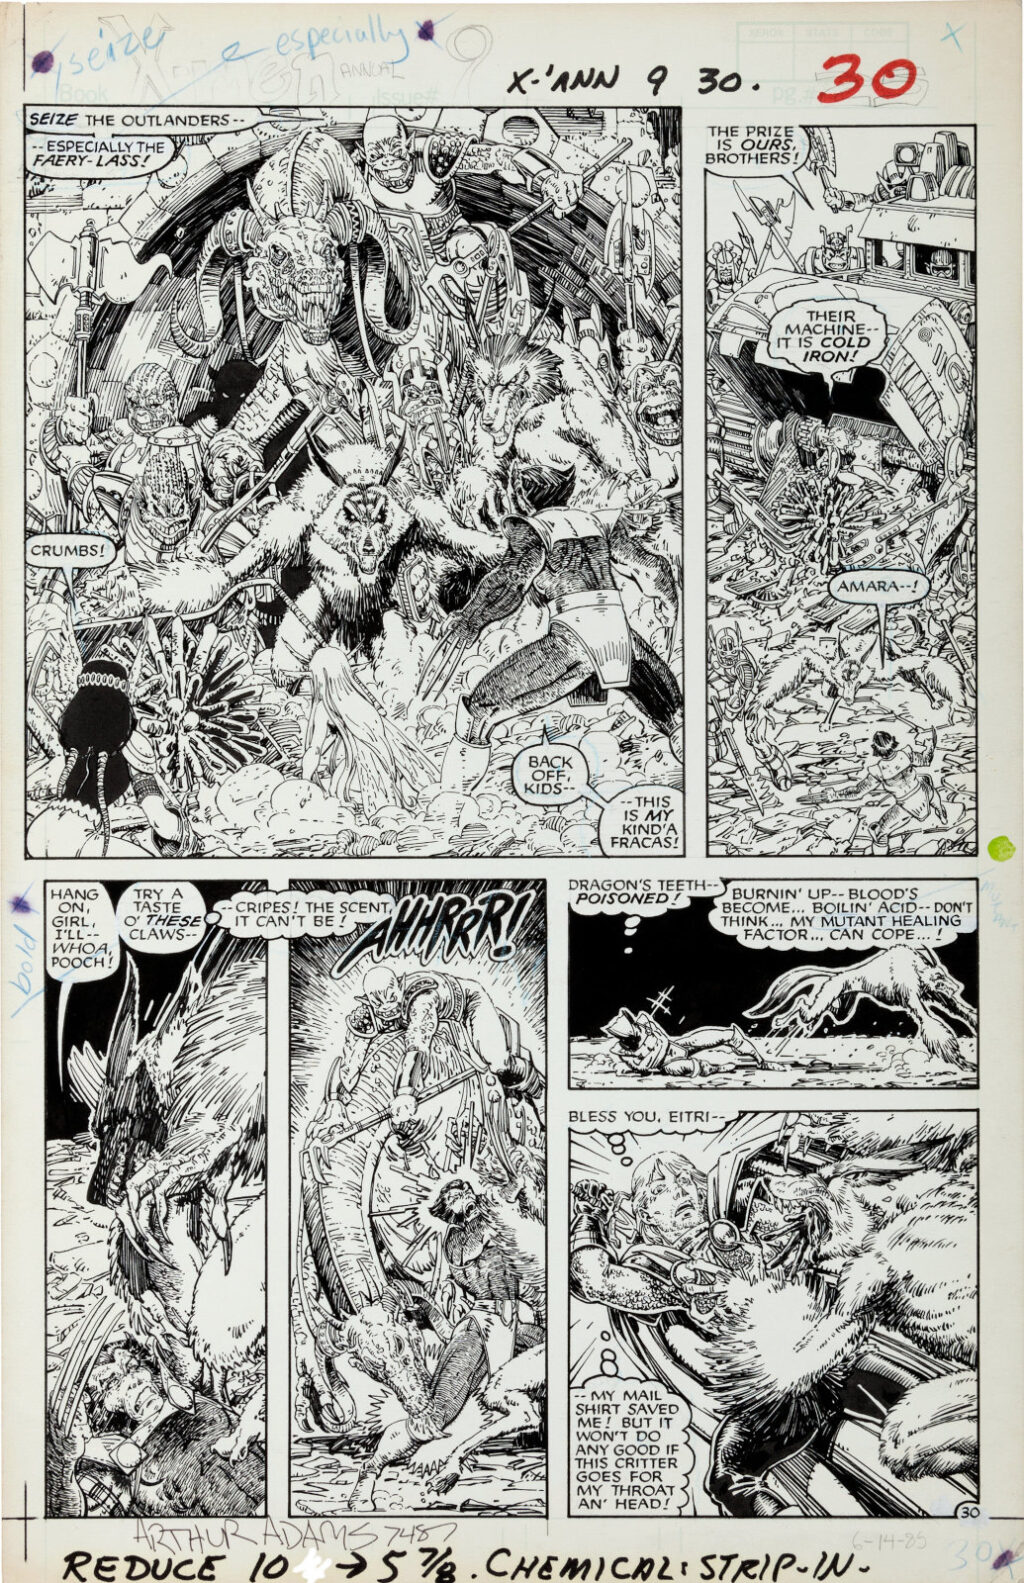 X Men Annual issue 9 page 30 by Arthur Adams